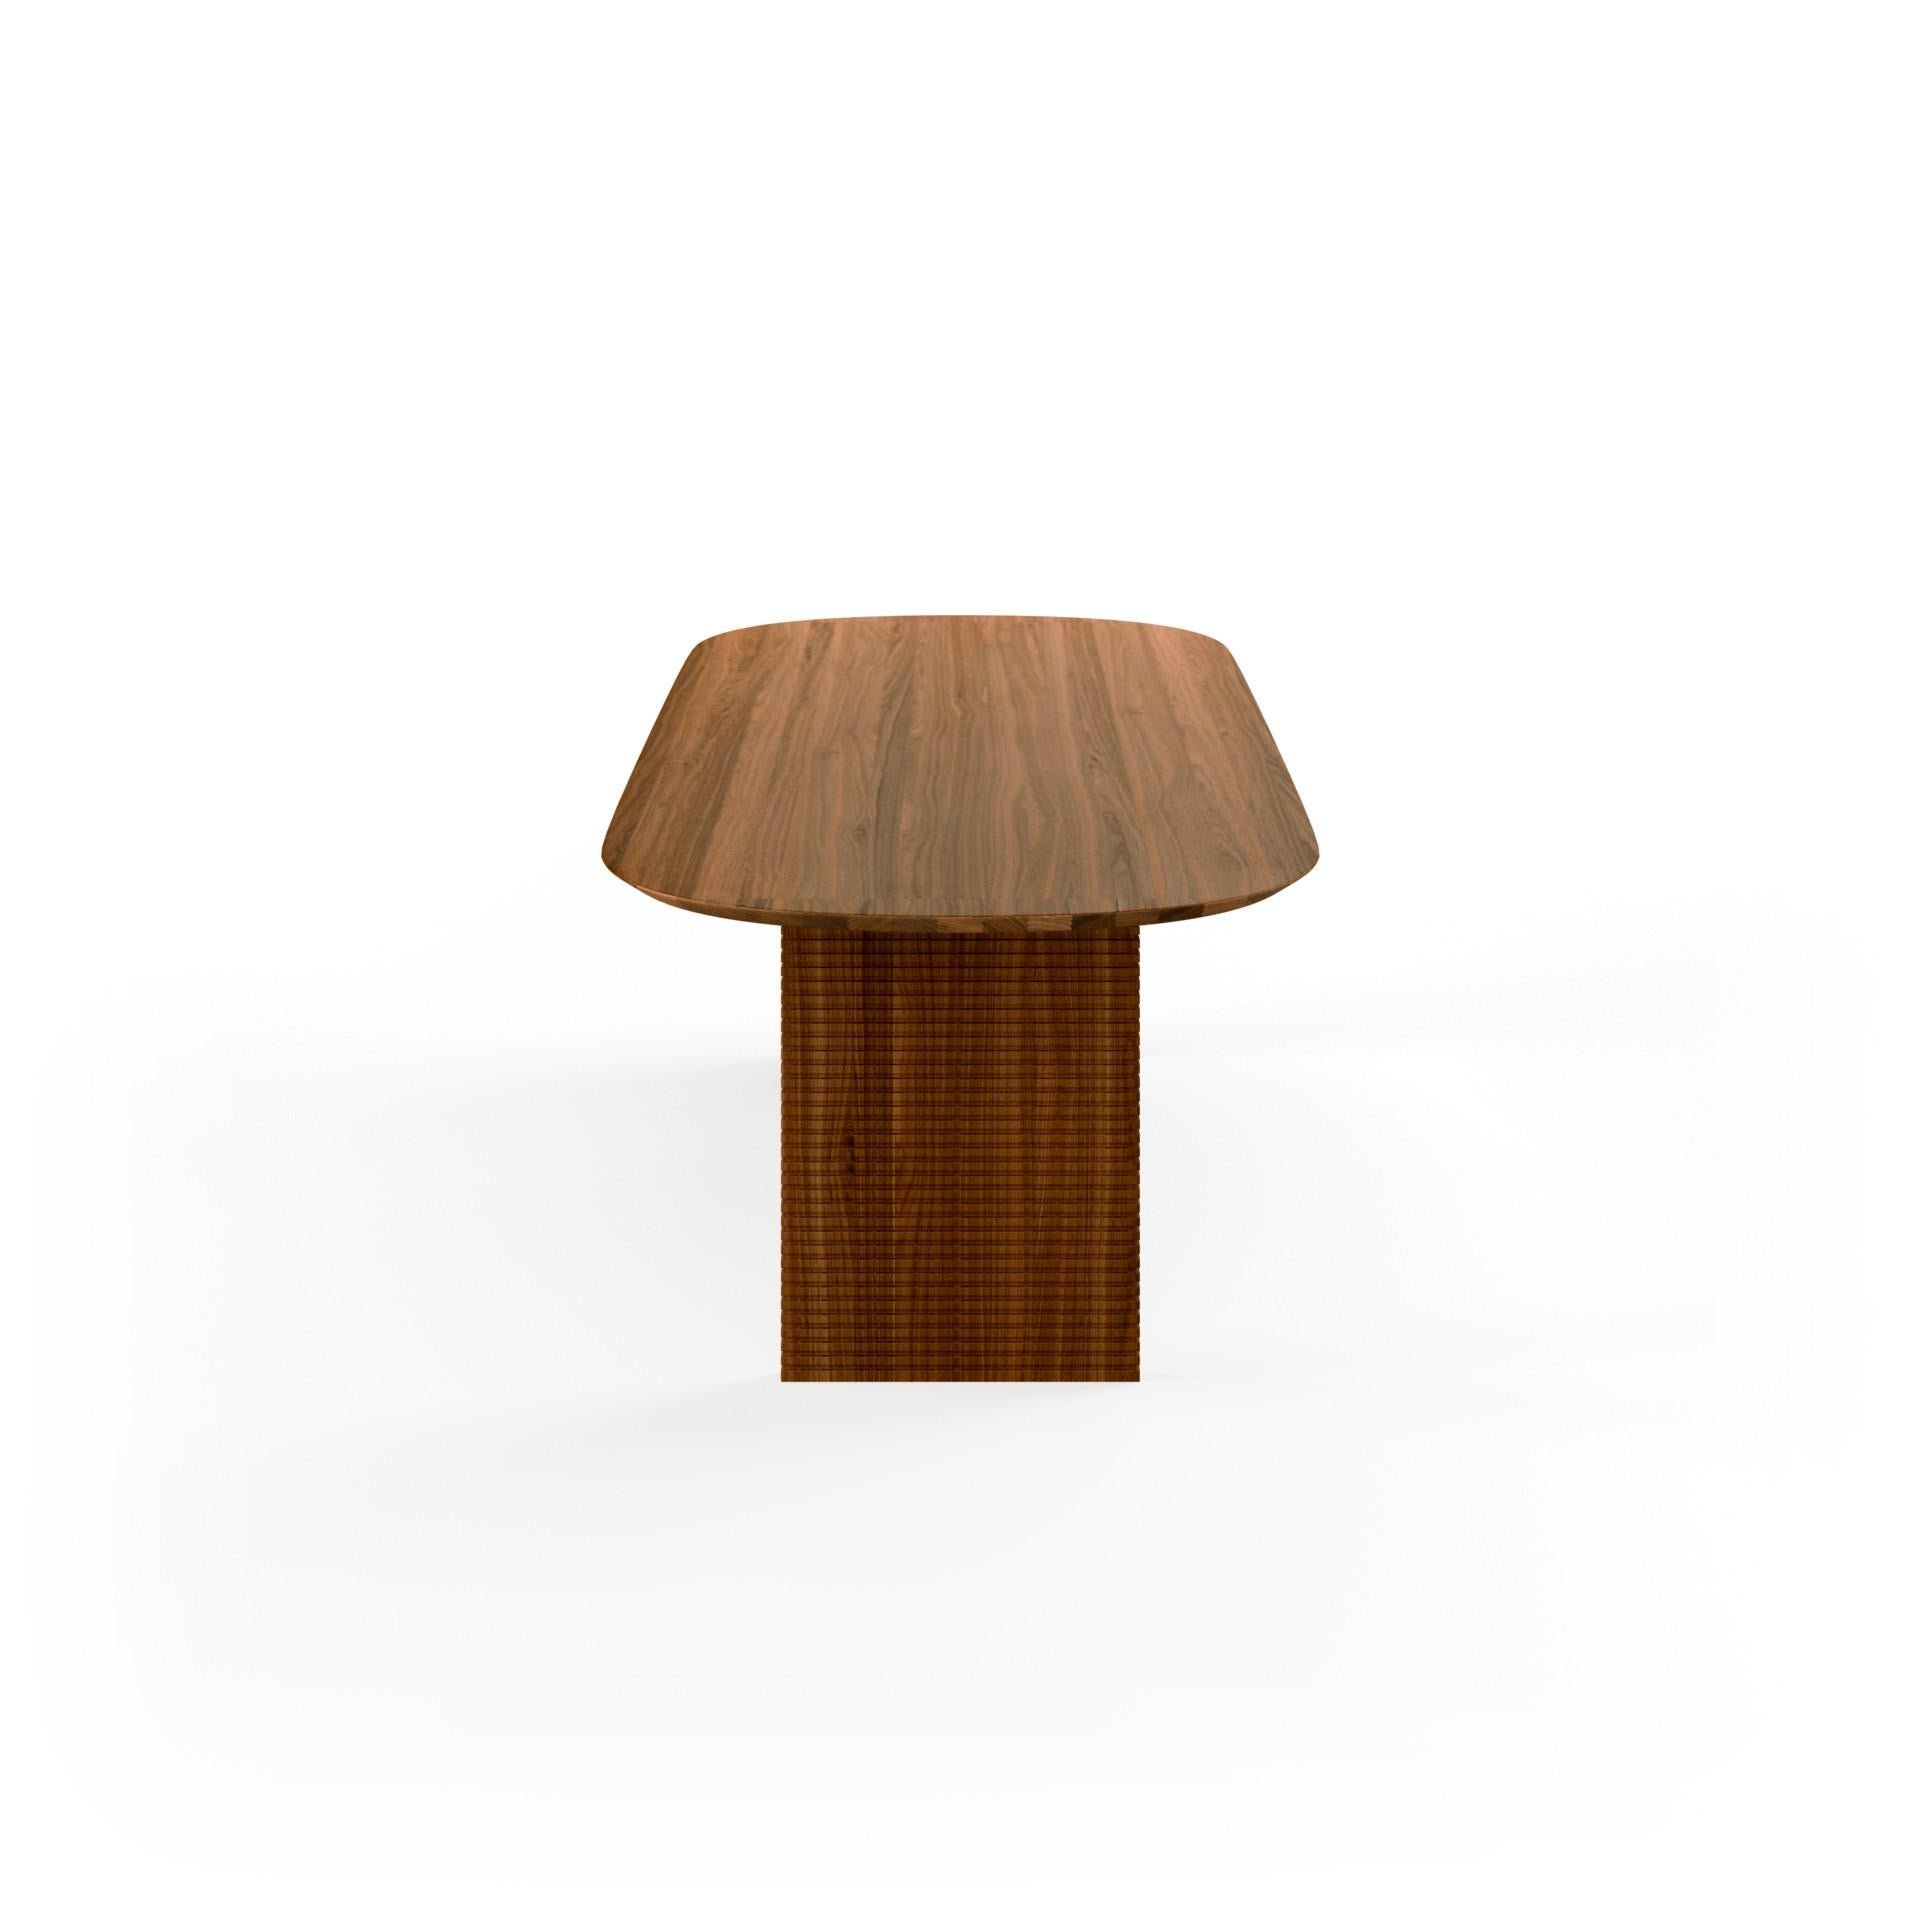 Semi is a Nordic-inspired dining table made entirely out of wood where the beautiful veins are allowed to unfold along the solid tabletop.

GM Semi is a table with a simple and elegant look letting the qualities of solid wood speak for itself. Our